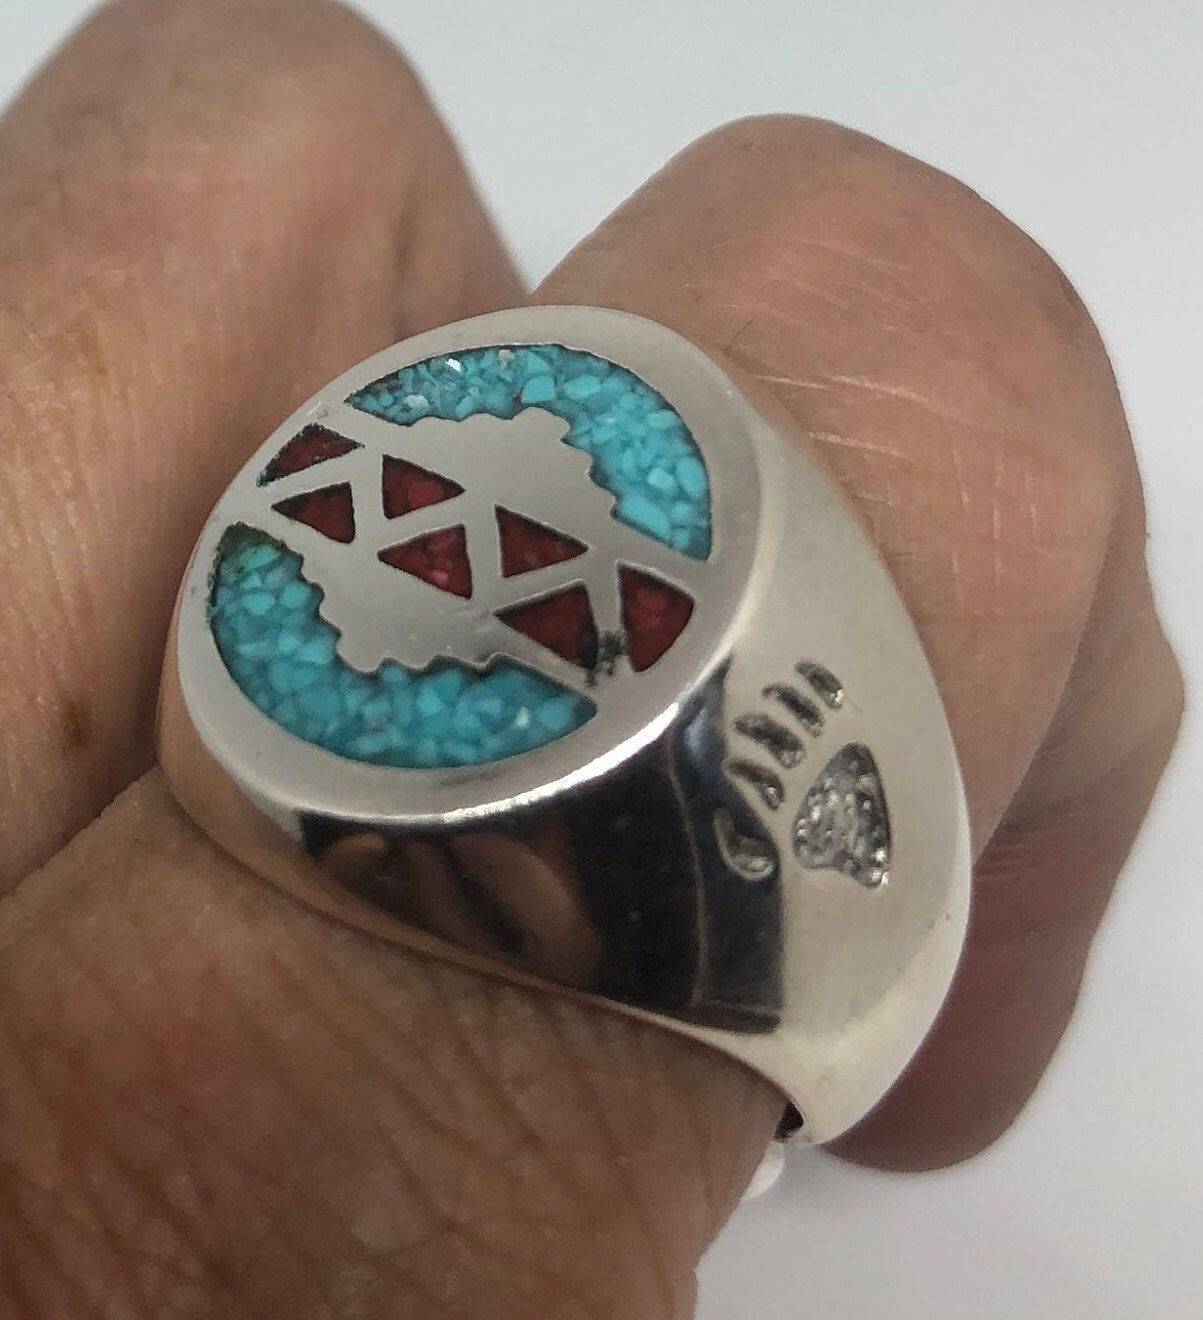 Vintage Native American Style Southwestern Turquoise Stone Inlay Mens Ring